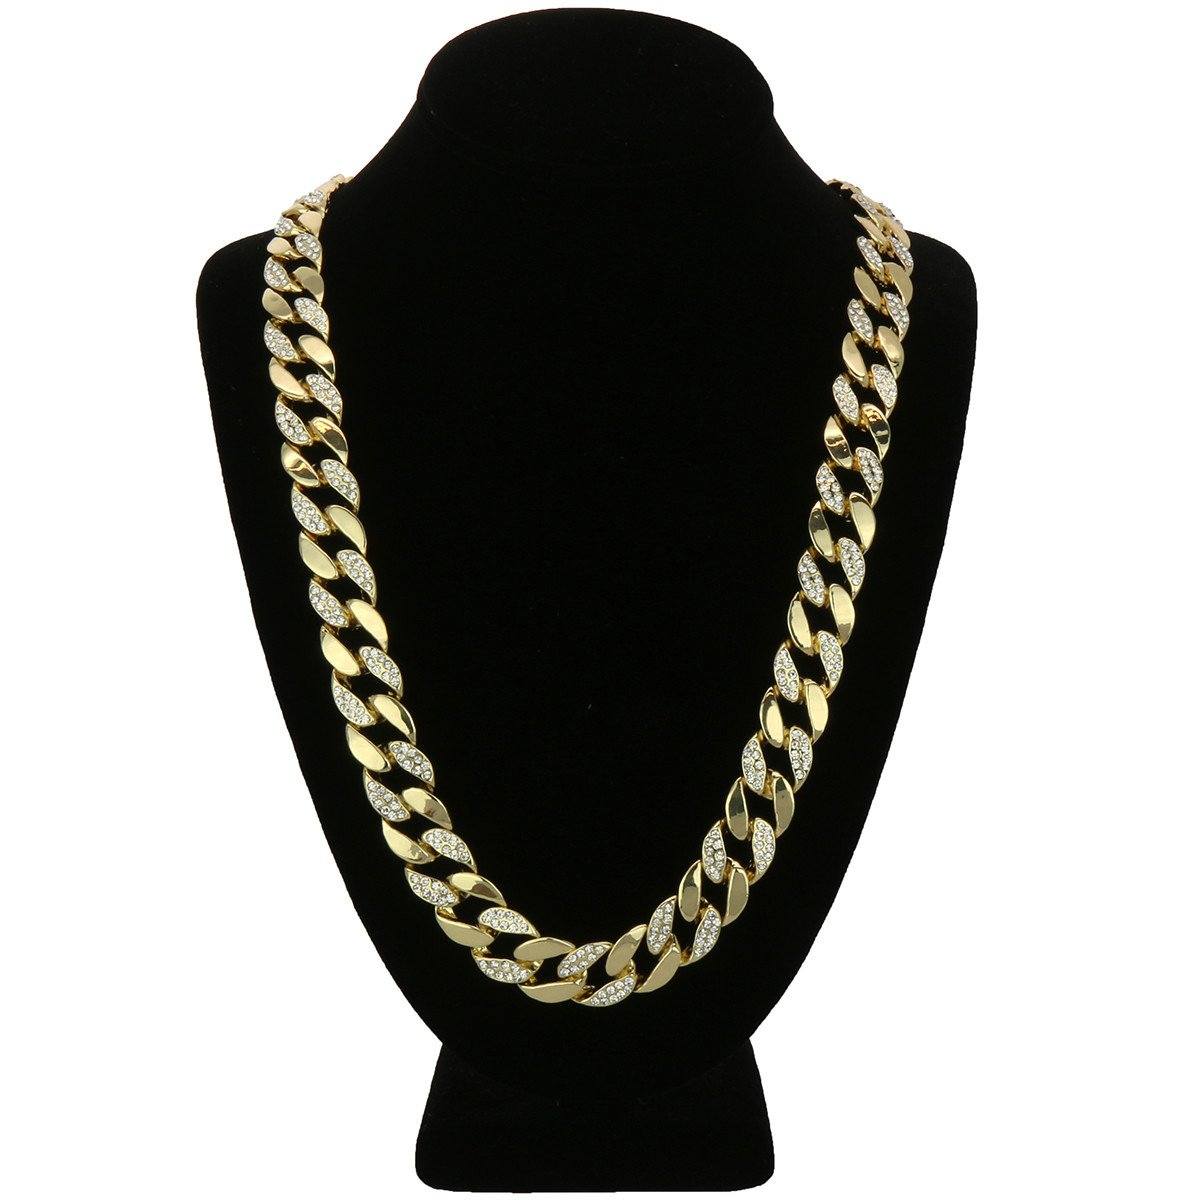 Gold Plated Cuban Half Cz Chain Necklace 15mm 30" Inches